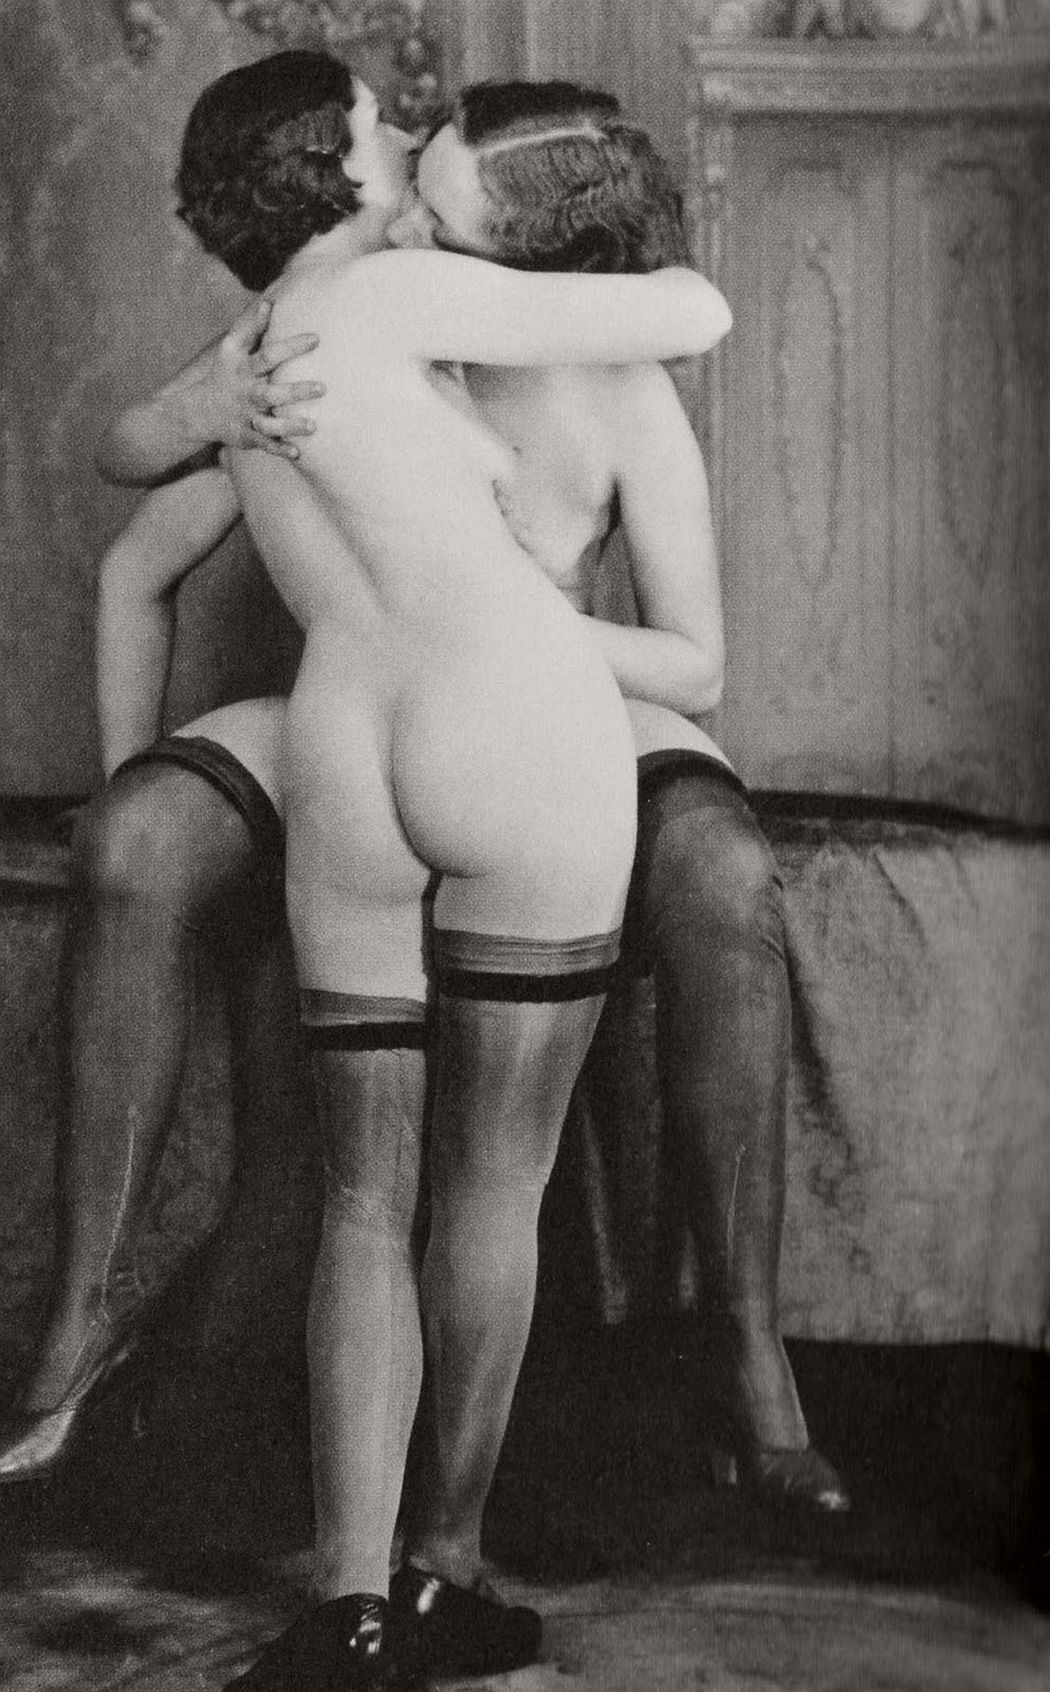 classic-vintage-lesbian-erotic-nude-french-postcard-1930s-08.jpg. 